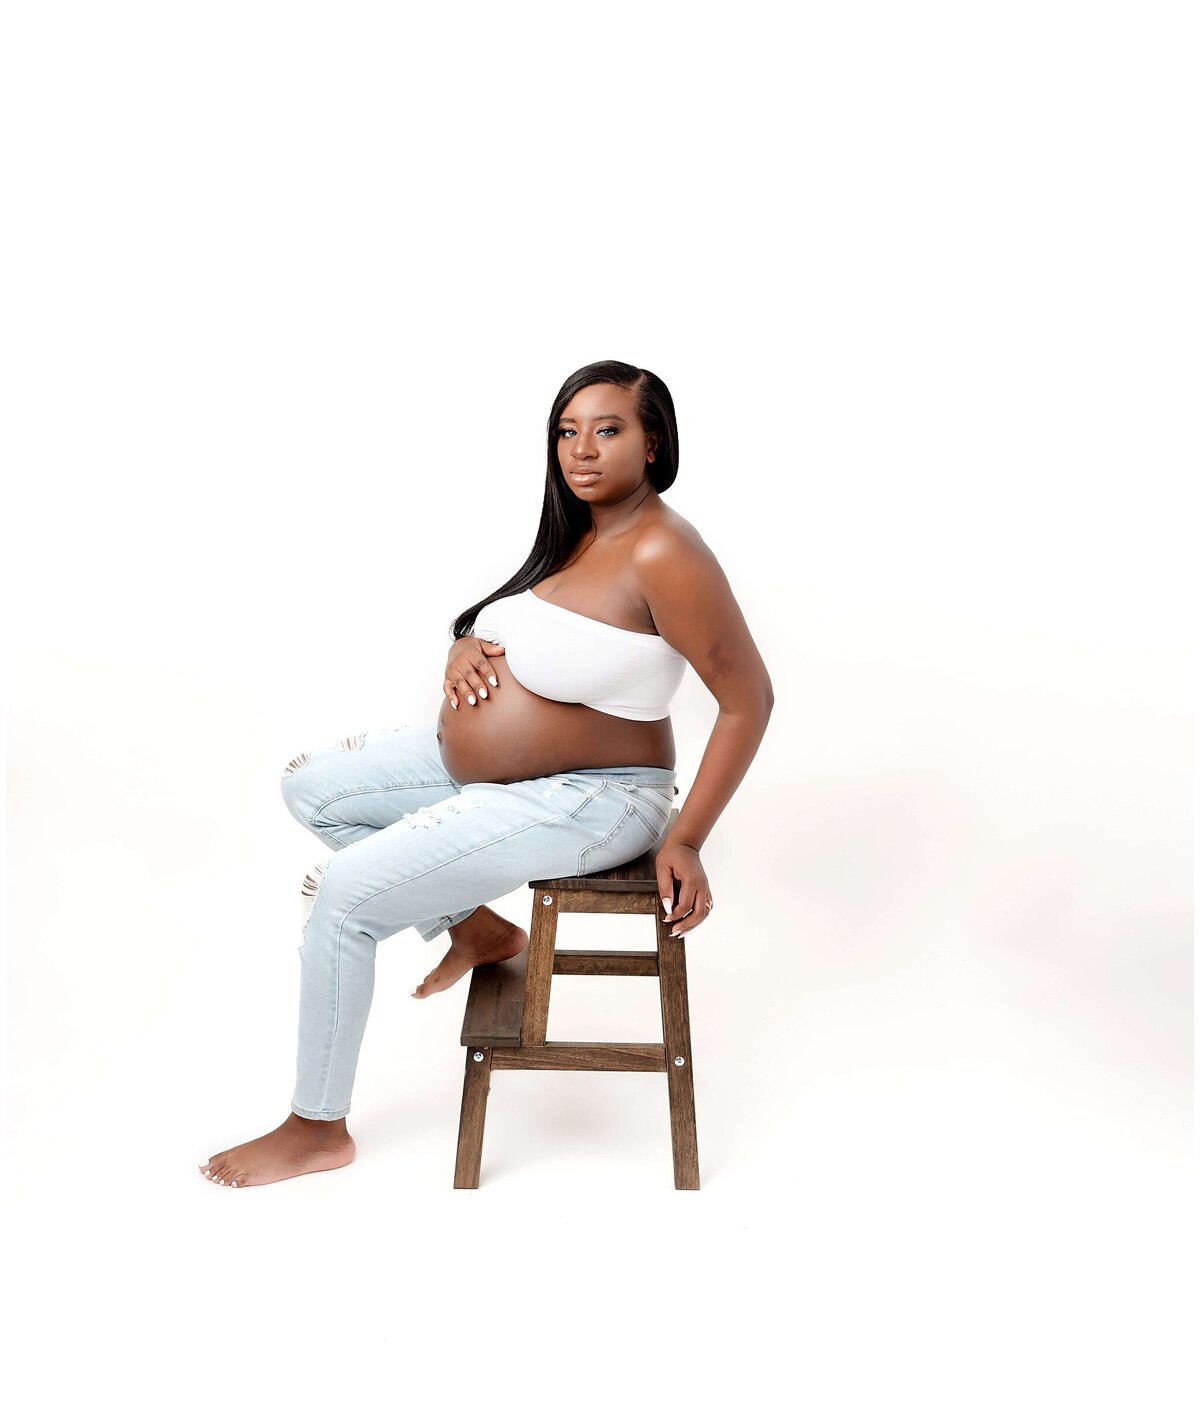 A pregnant woman sitting on a stool, wearing jeans and a tube top outfit. She rests her hands on her baby bump, showcasing the bond between mother and child. The soft lighting highlights her radiant glow, capturing the beauty and serenity of this maternity session.